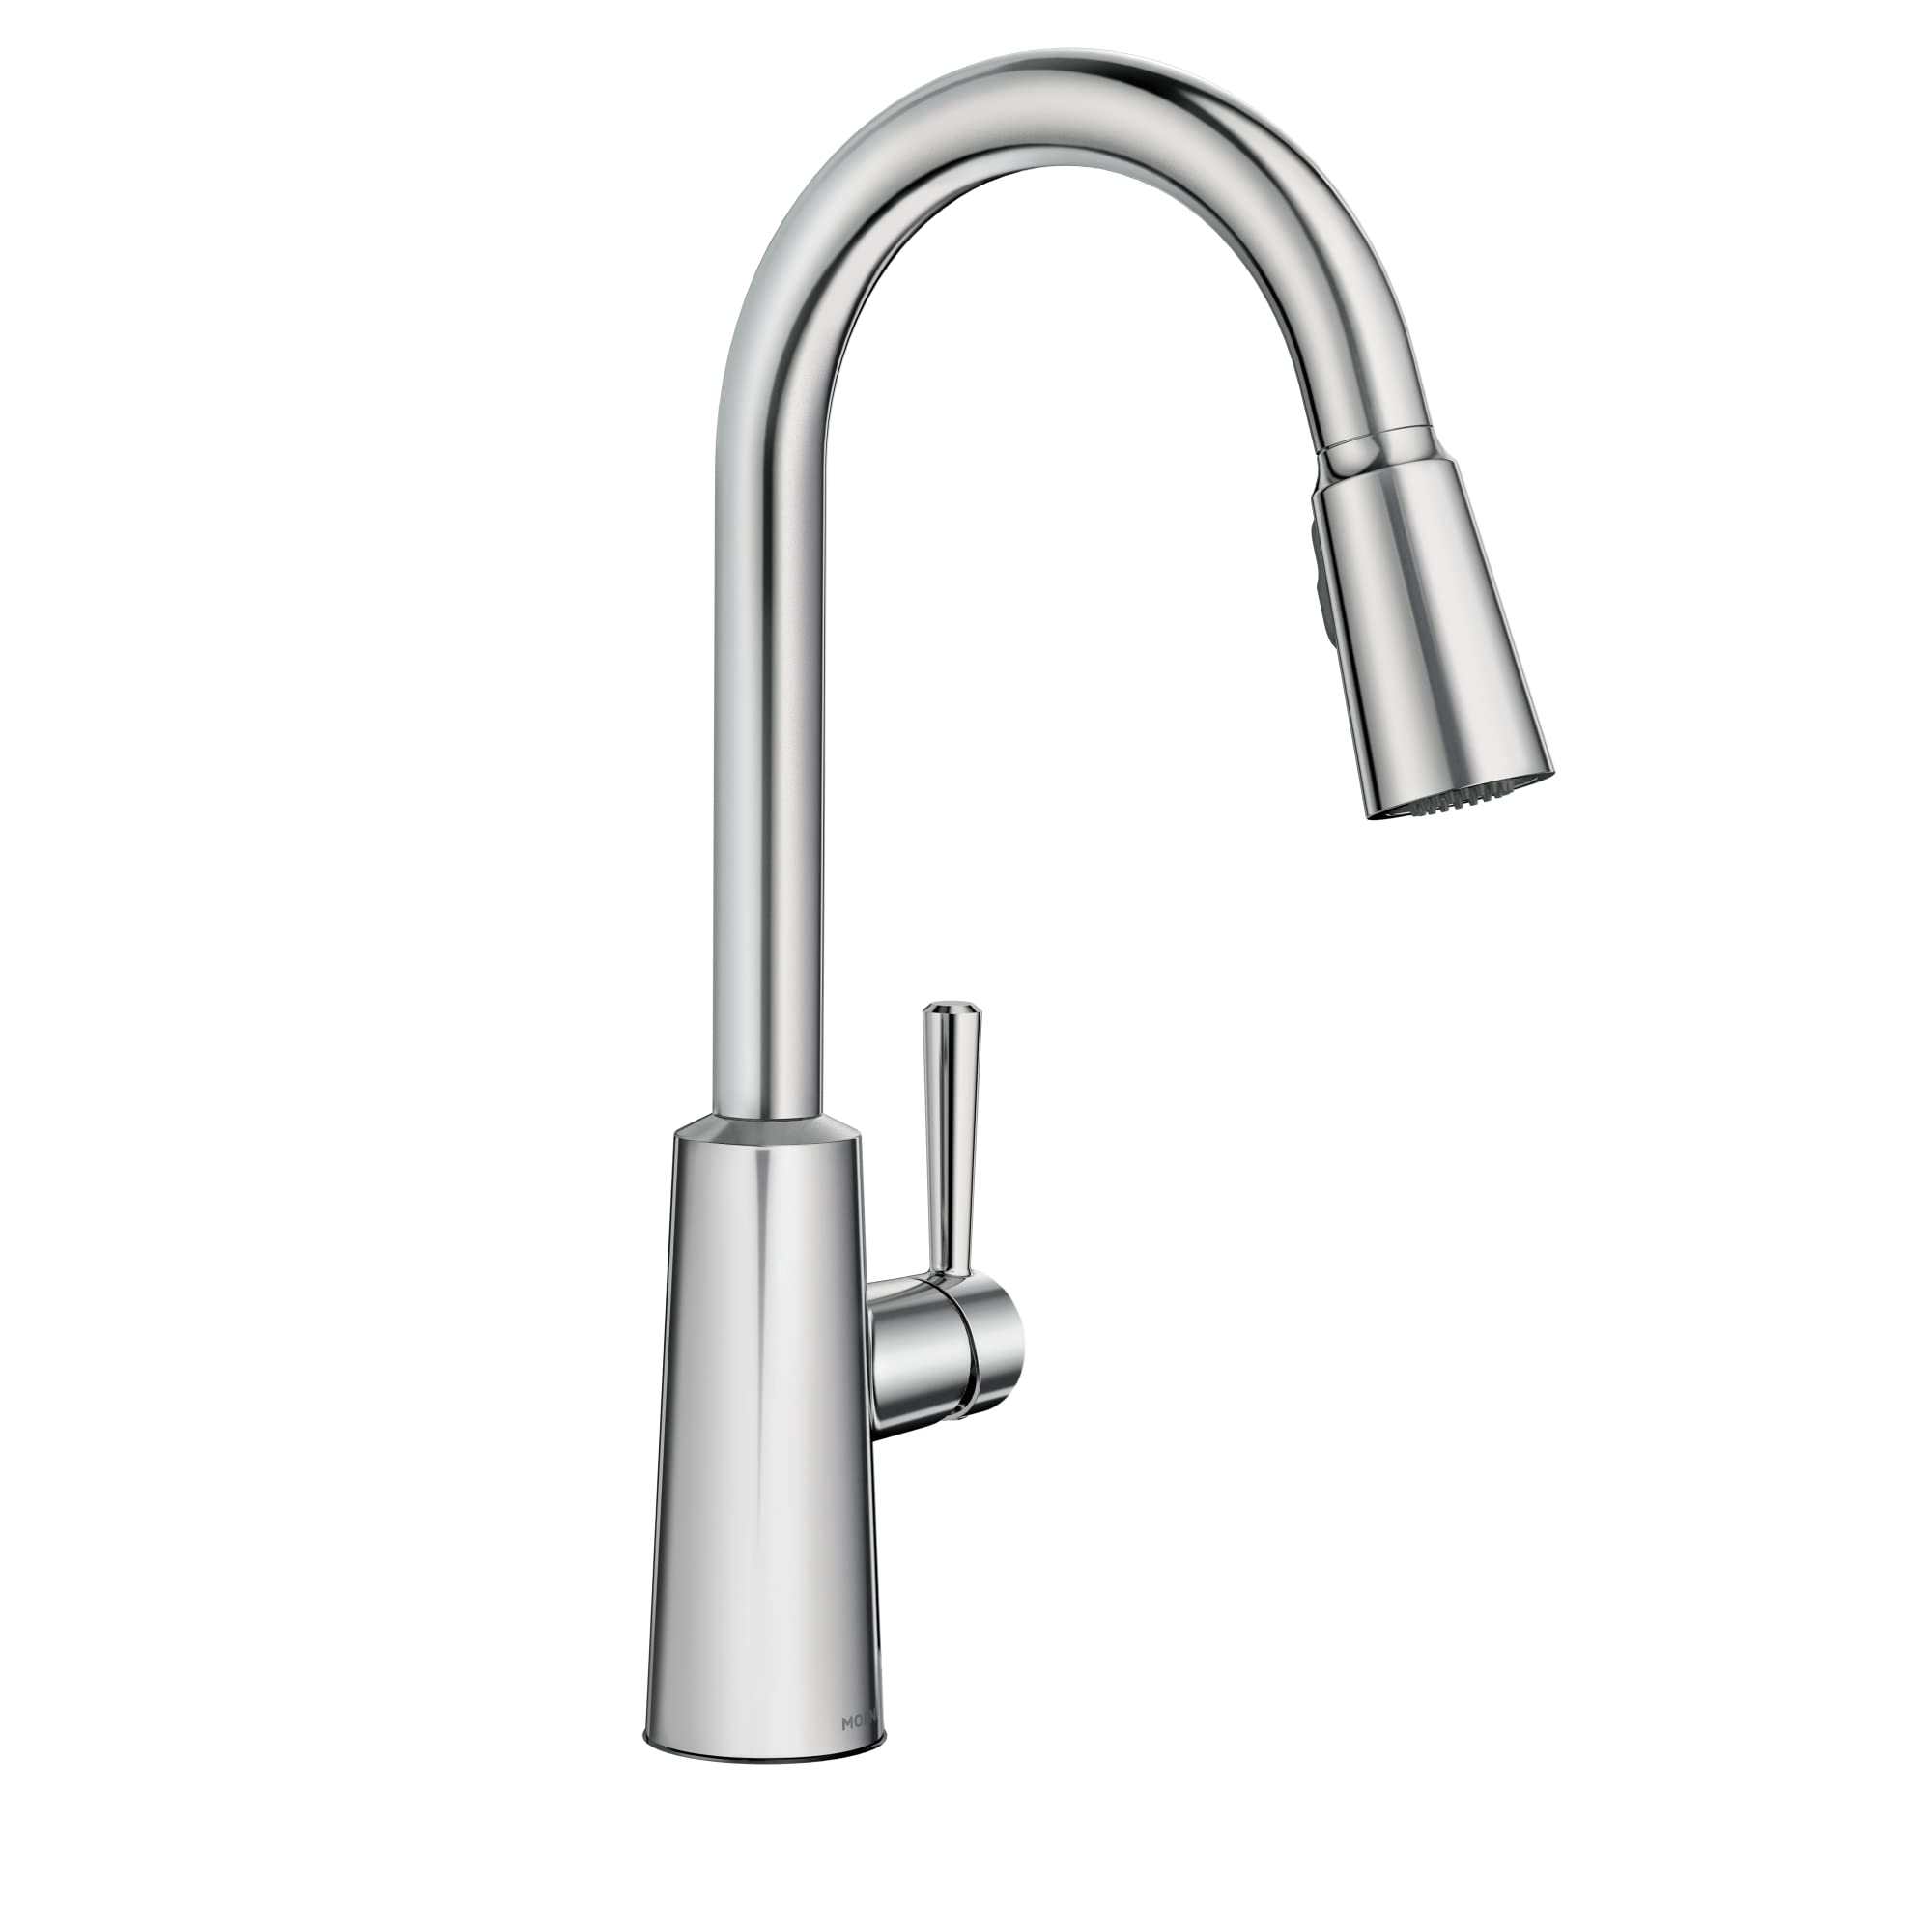 Moen Riley Chrome One-Handle Pulldown Kitchen Faucet Featuring Power Boost for a Faster Clean and Reflex Docking System for the Spray Head, Modern Kitchen Sink Faucet, 7402C